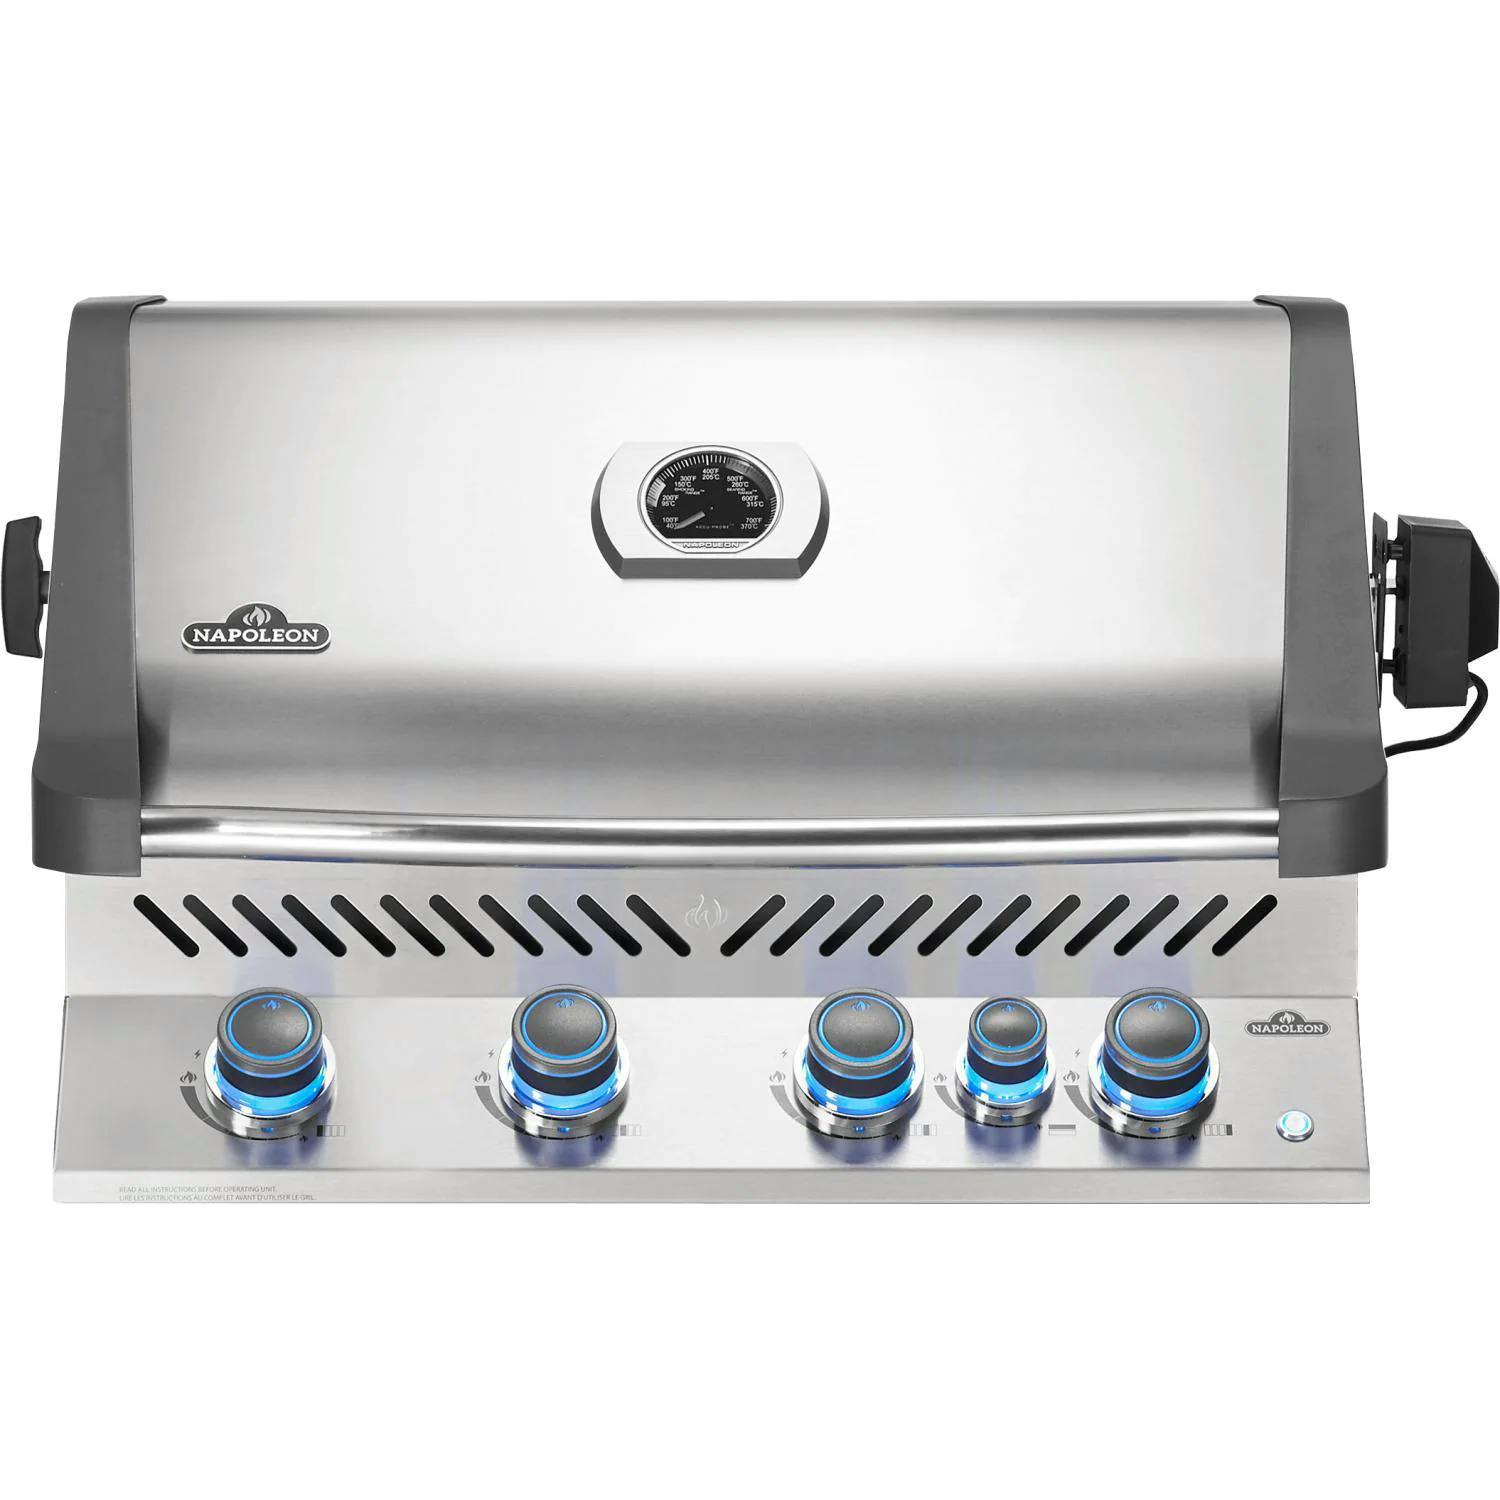 Napoleon Prestige 500 Built-in Gas Grill with Infrared Rear Burner and Rotisserie Kit · Natural Gas